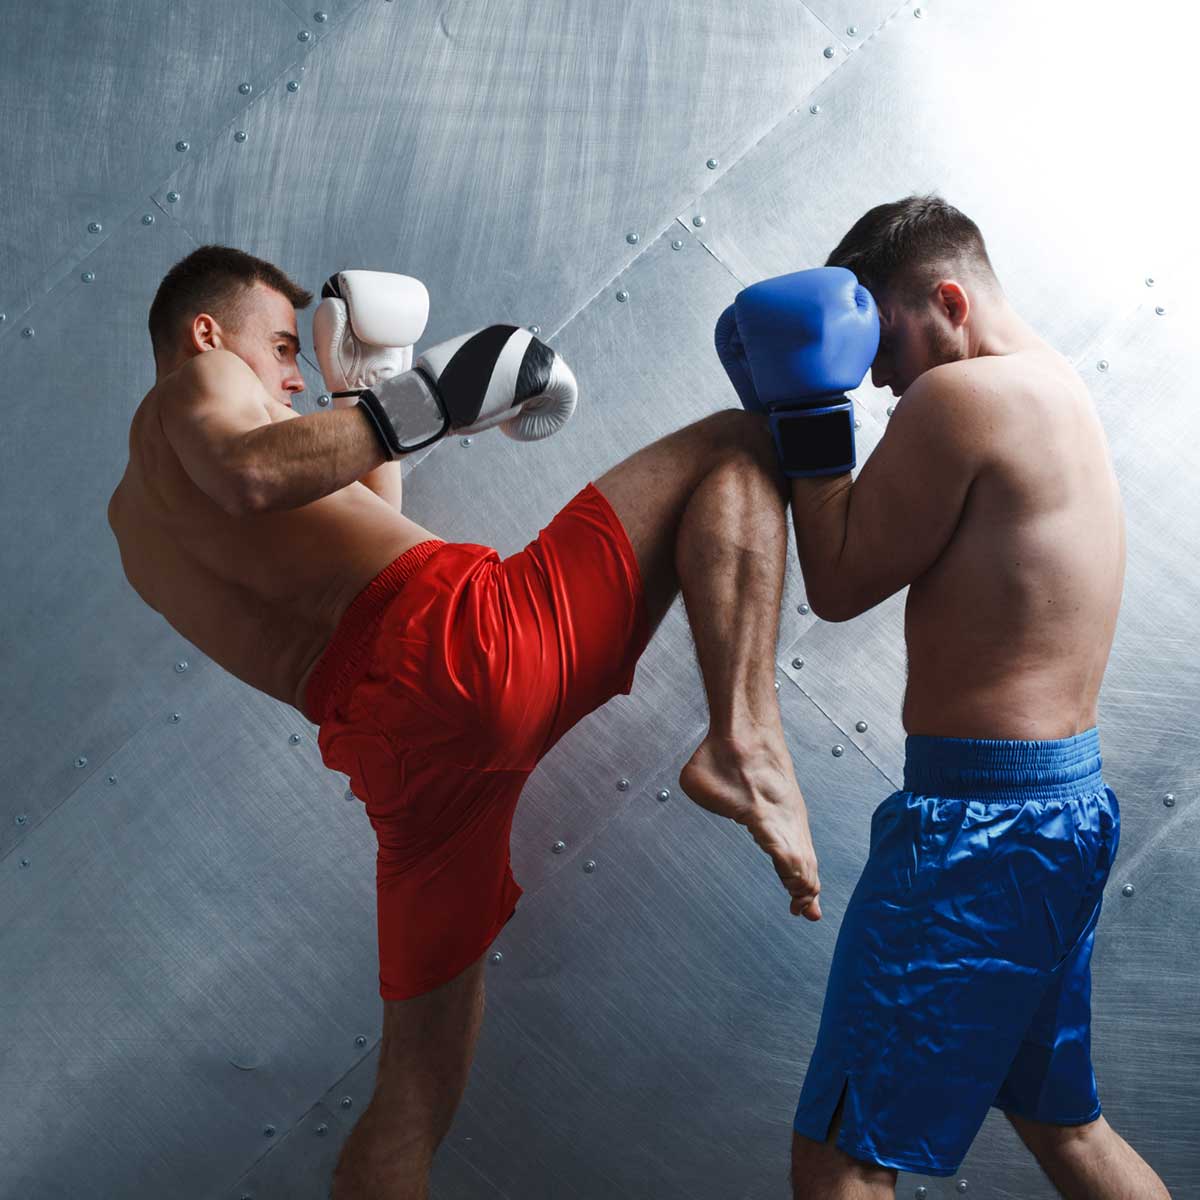 Fight Shorts Manufacturers in Brazil